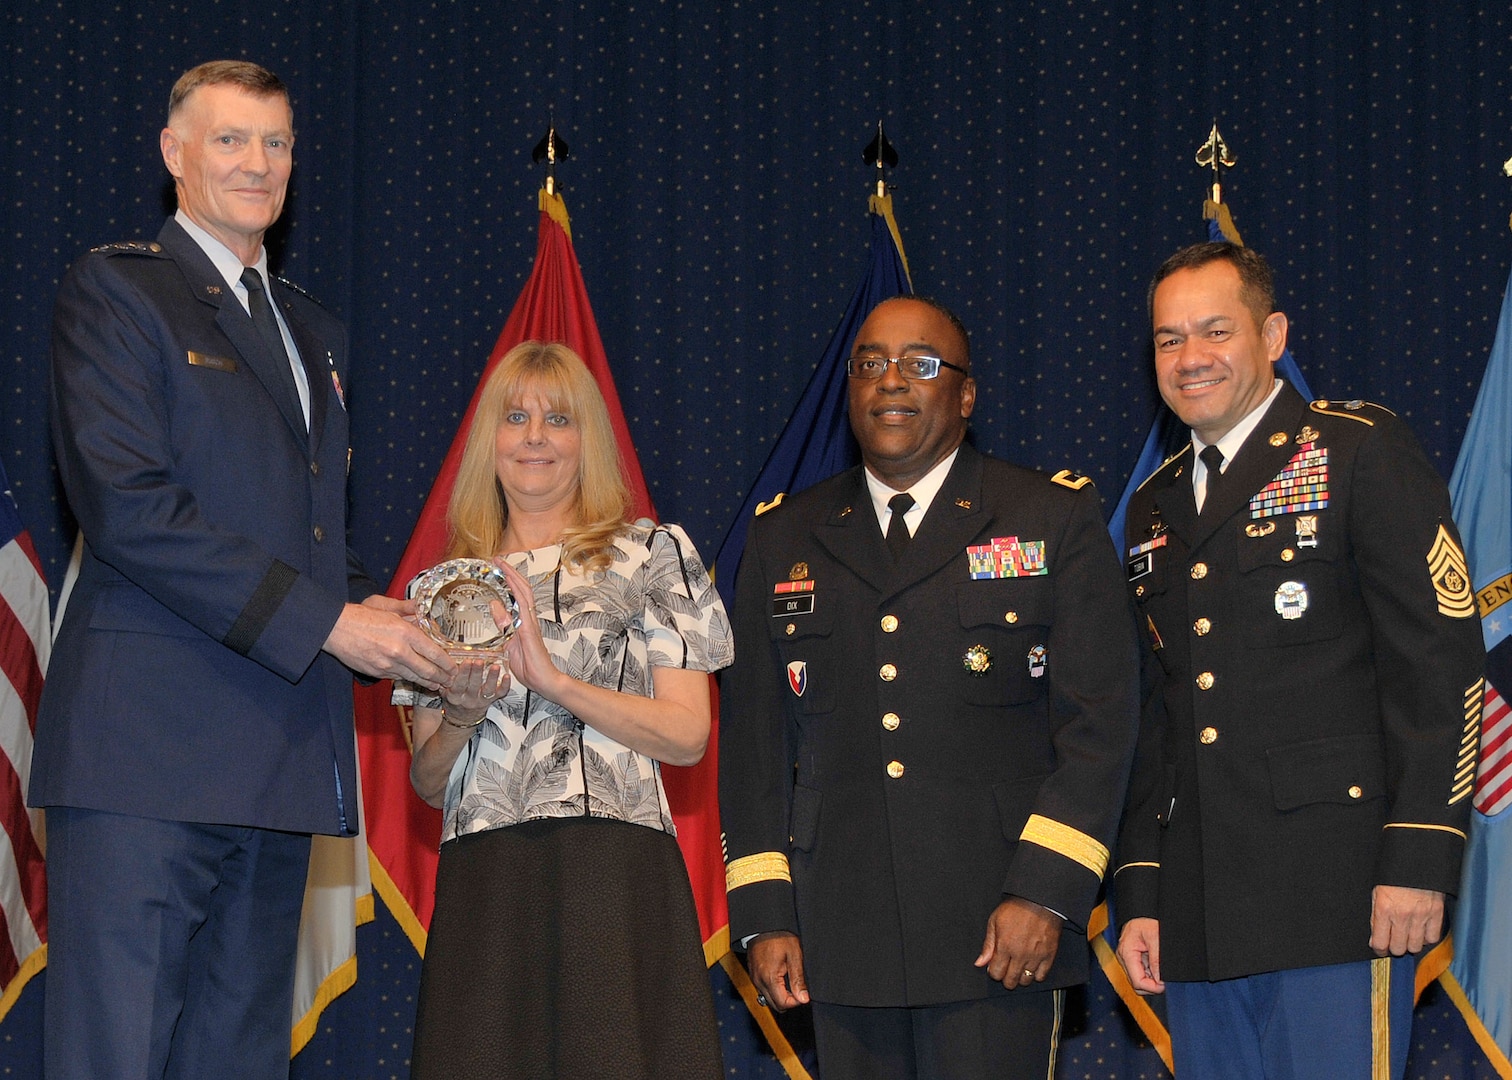 DLA director Air Force Lt. Gen. Andy Busch, left, presents Bikki Queen, secretary for the Preservation, Packaging, Packing, and Marking Branch at Defense Logistics Agency Distribution Oklahoma City, Okla., with one of the top Ten Outstanding DLA Personnel of the Year awards for 2015 awards at the 48th annual employee recognition ceremony Dec. 10. Distribution’s commander Army Brig. Gen. Richard Dix, second from right, and DLA’s Senior Enlisted Leader Army Command Sgt. Maj. Charles Tobin, right, were also on-hand to present the award.